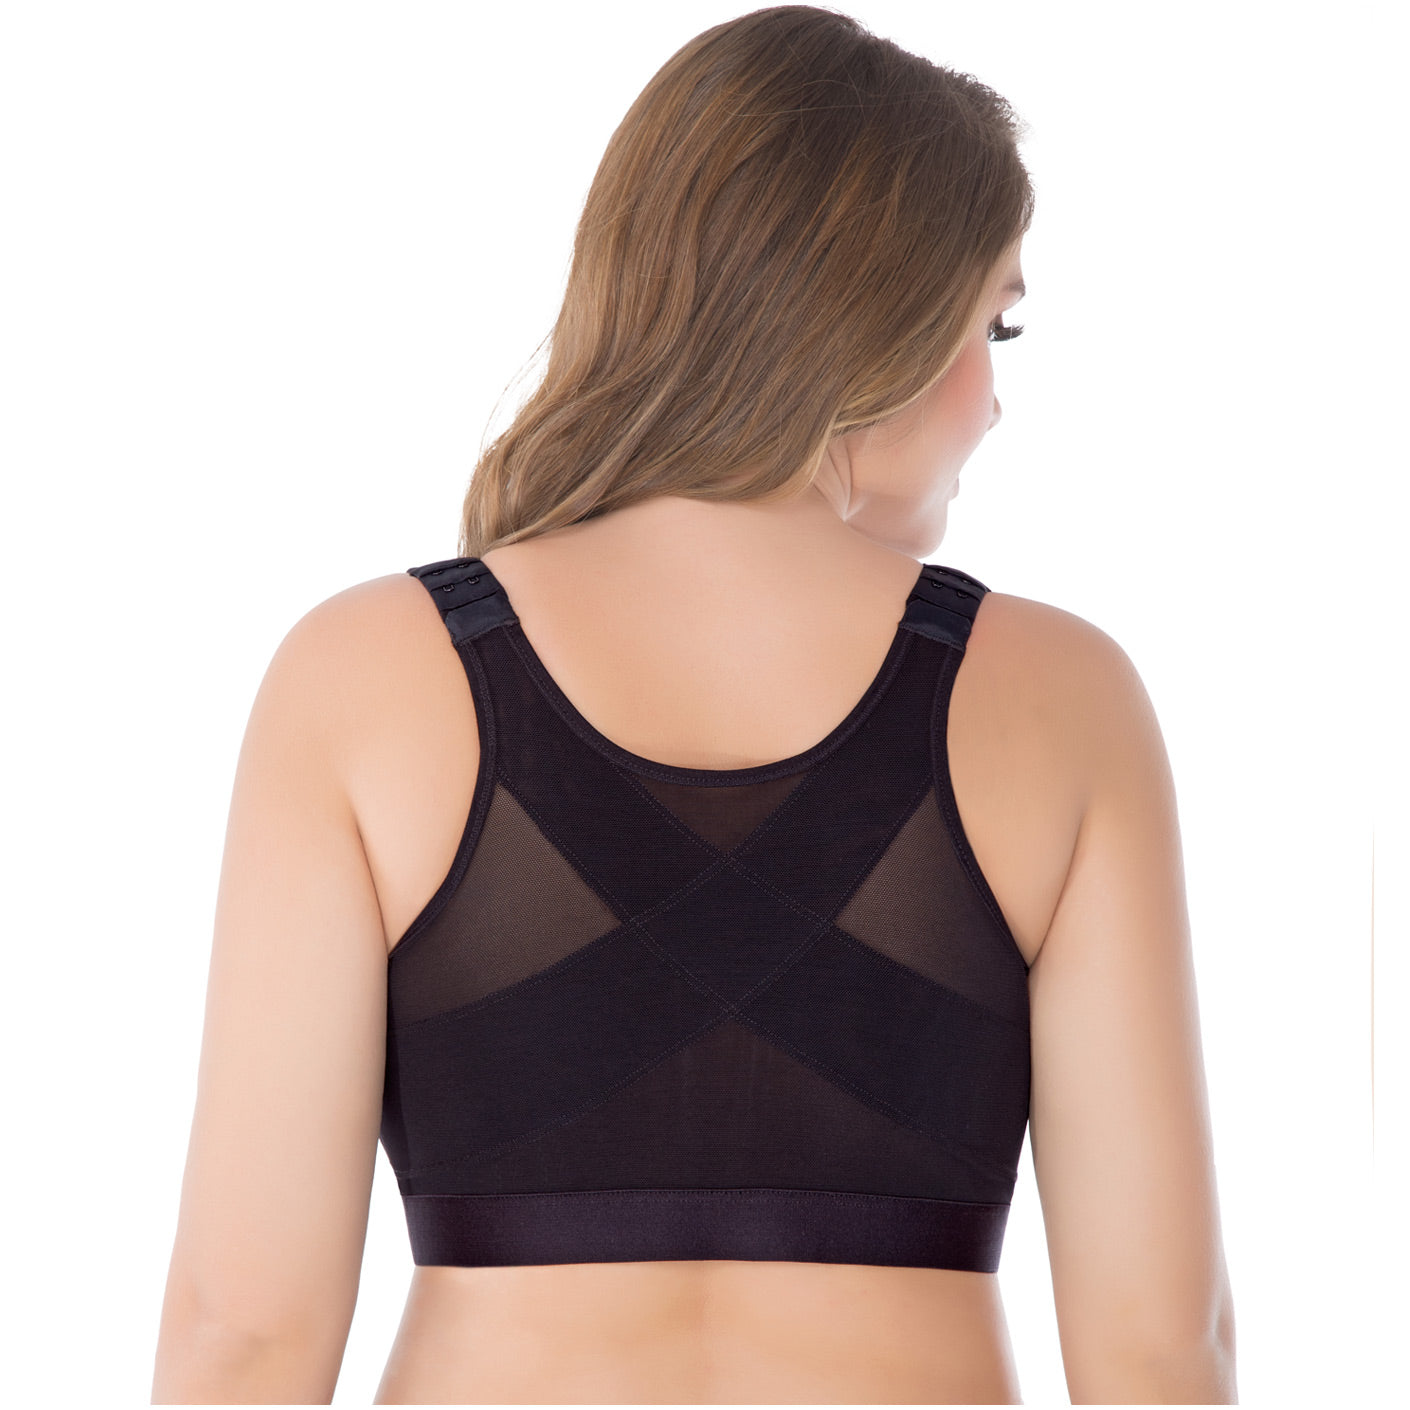 Extra Firm High Compression Full Cup Push Up Bra back support